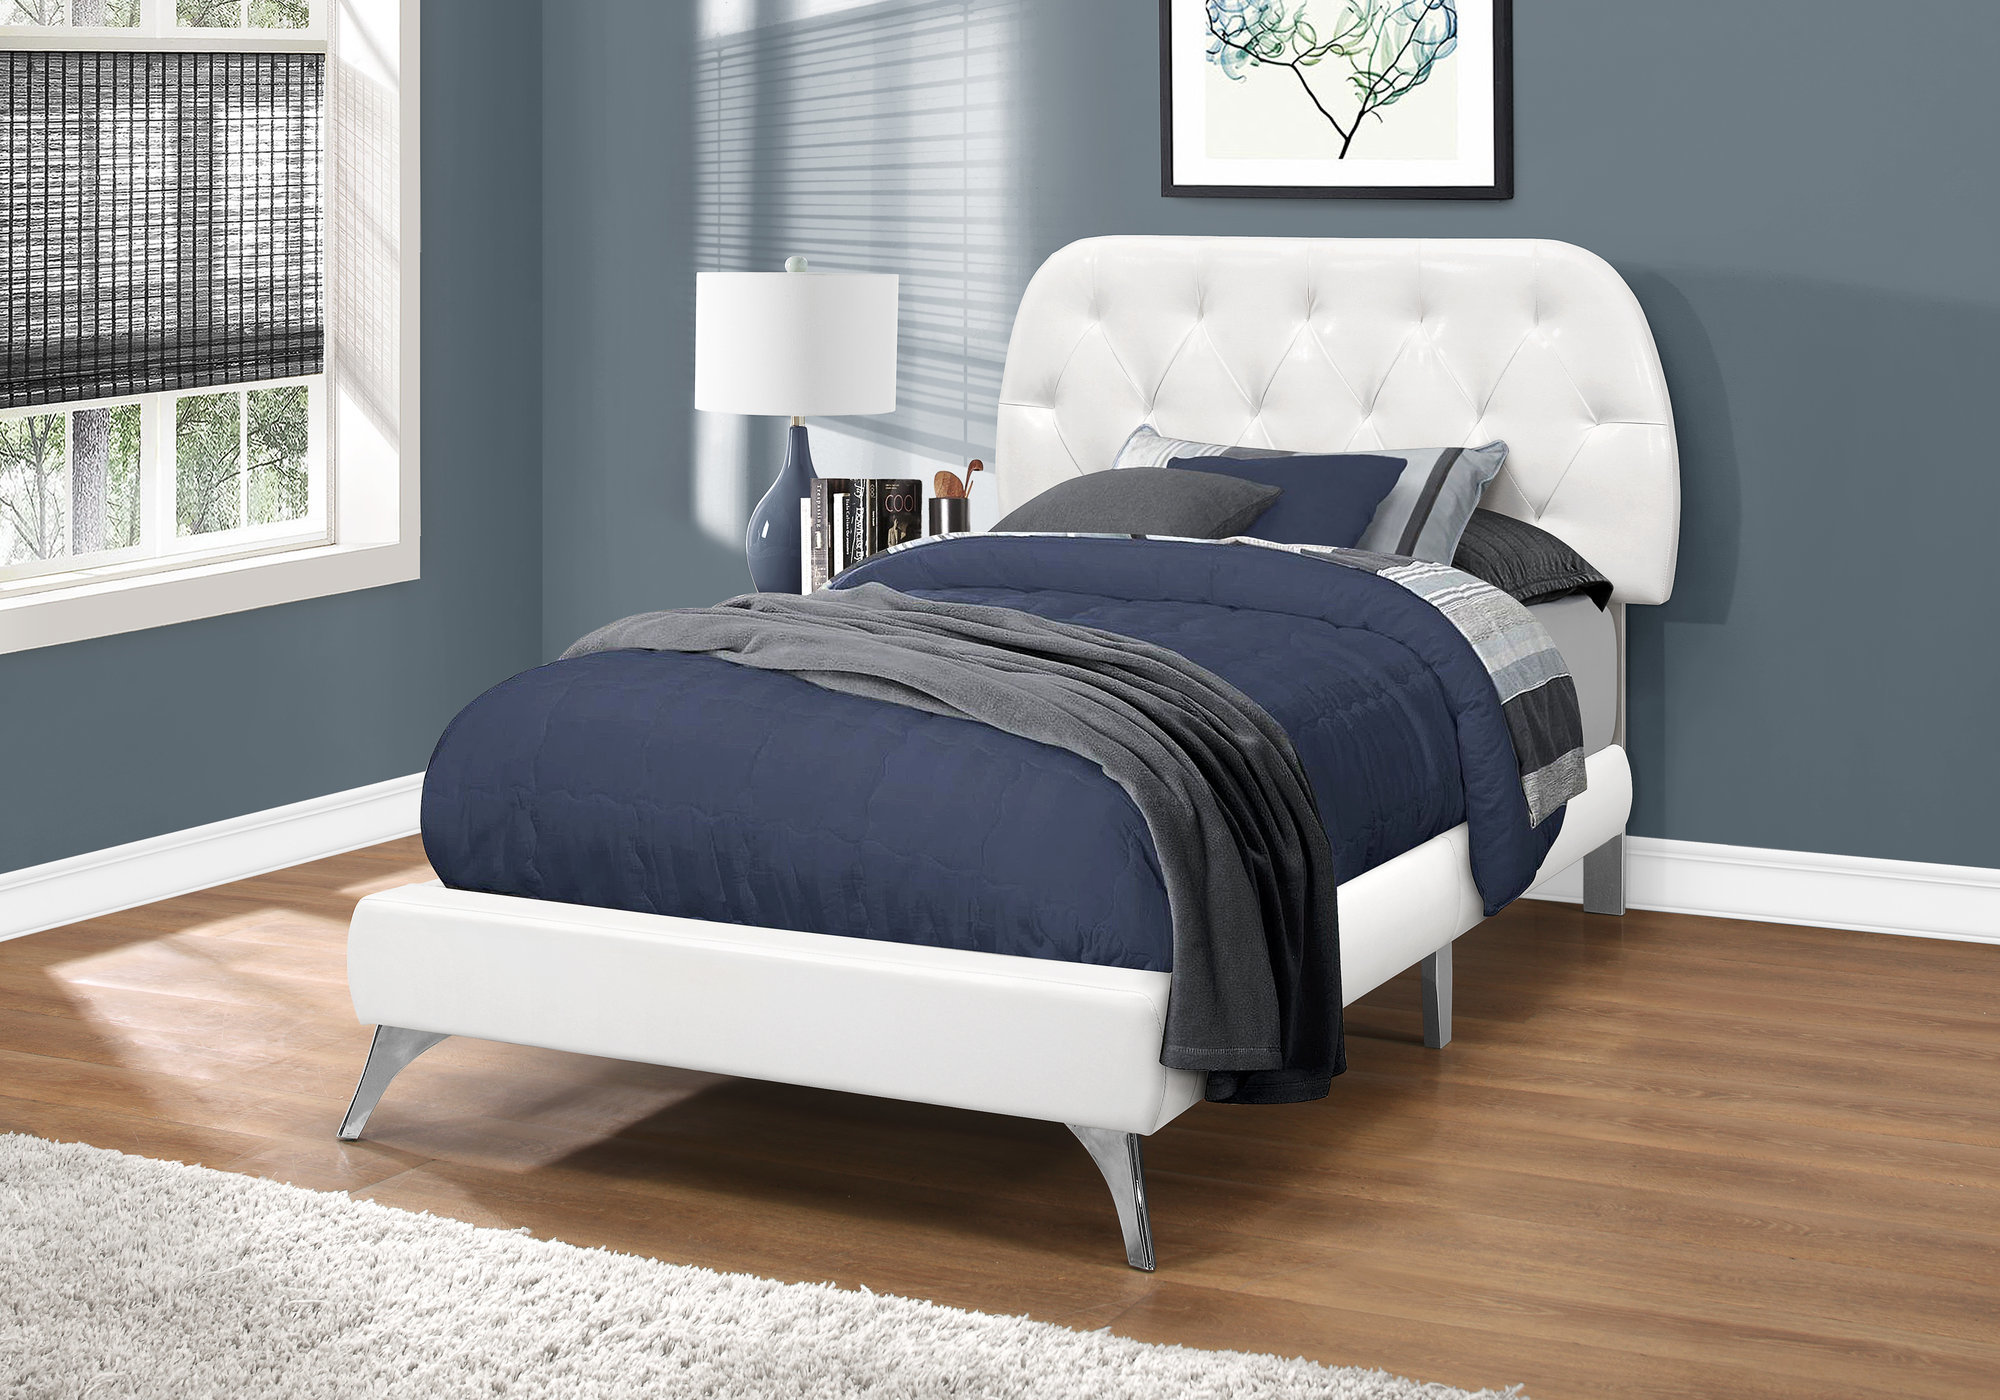 45.25" White Solid Wood MDF Foam and Linen Twin Sized Bed with Chrome Legs